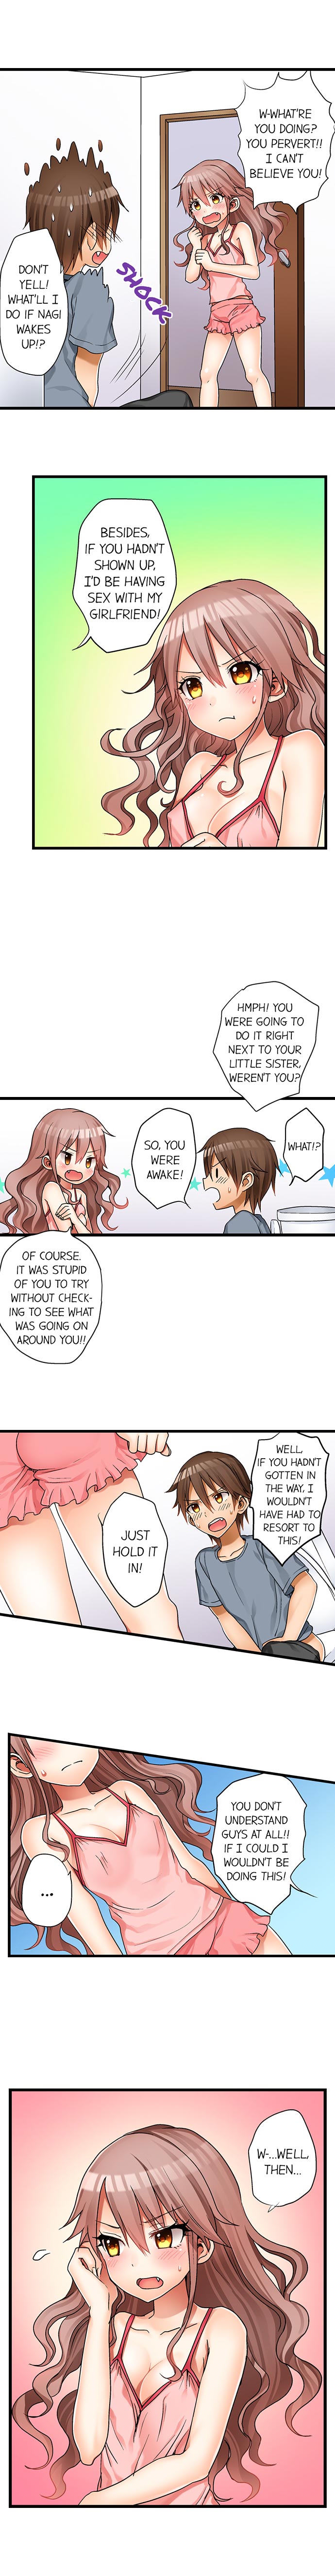 [Porori] Hatsuecchi no Aite wa... Imouto! My First Time is with.... My Little Sister ! (Ch.01-86) [English] - Page 23